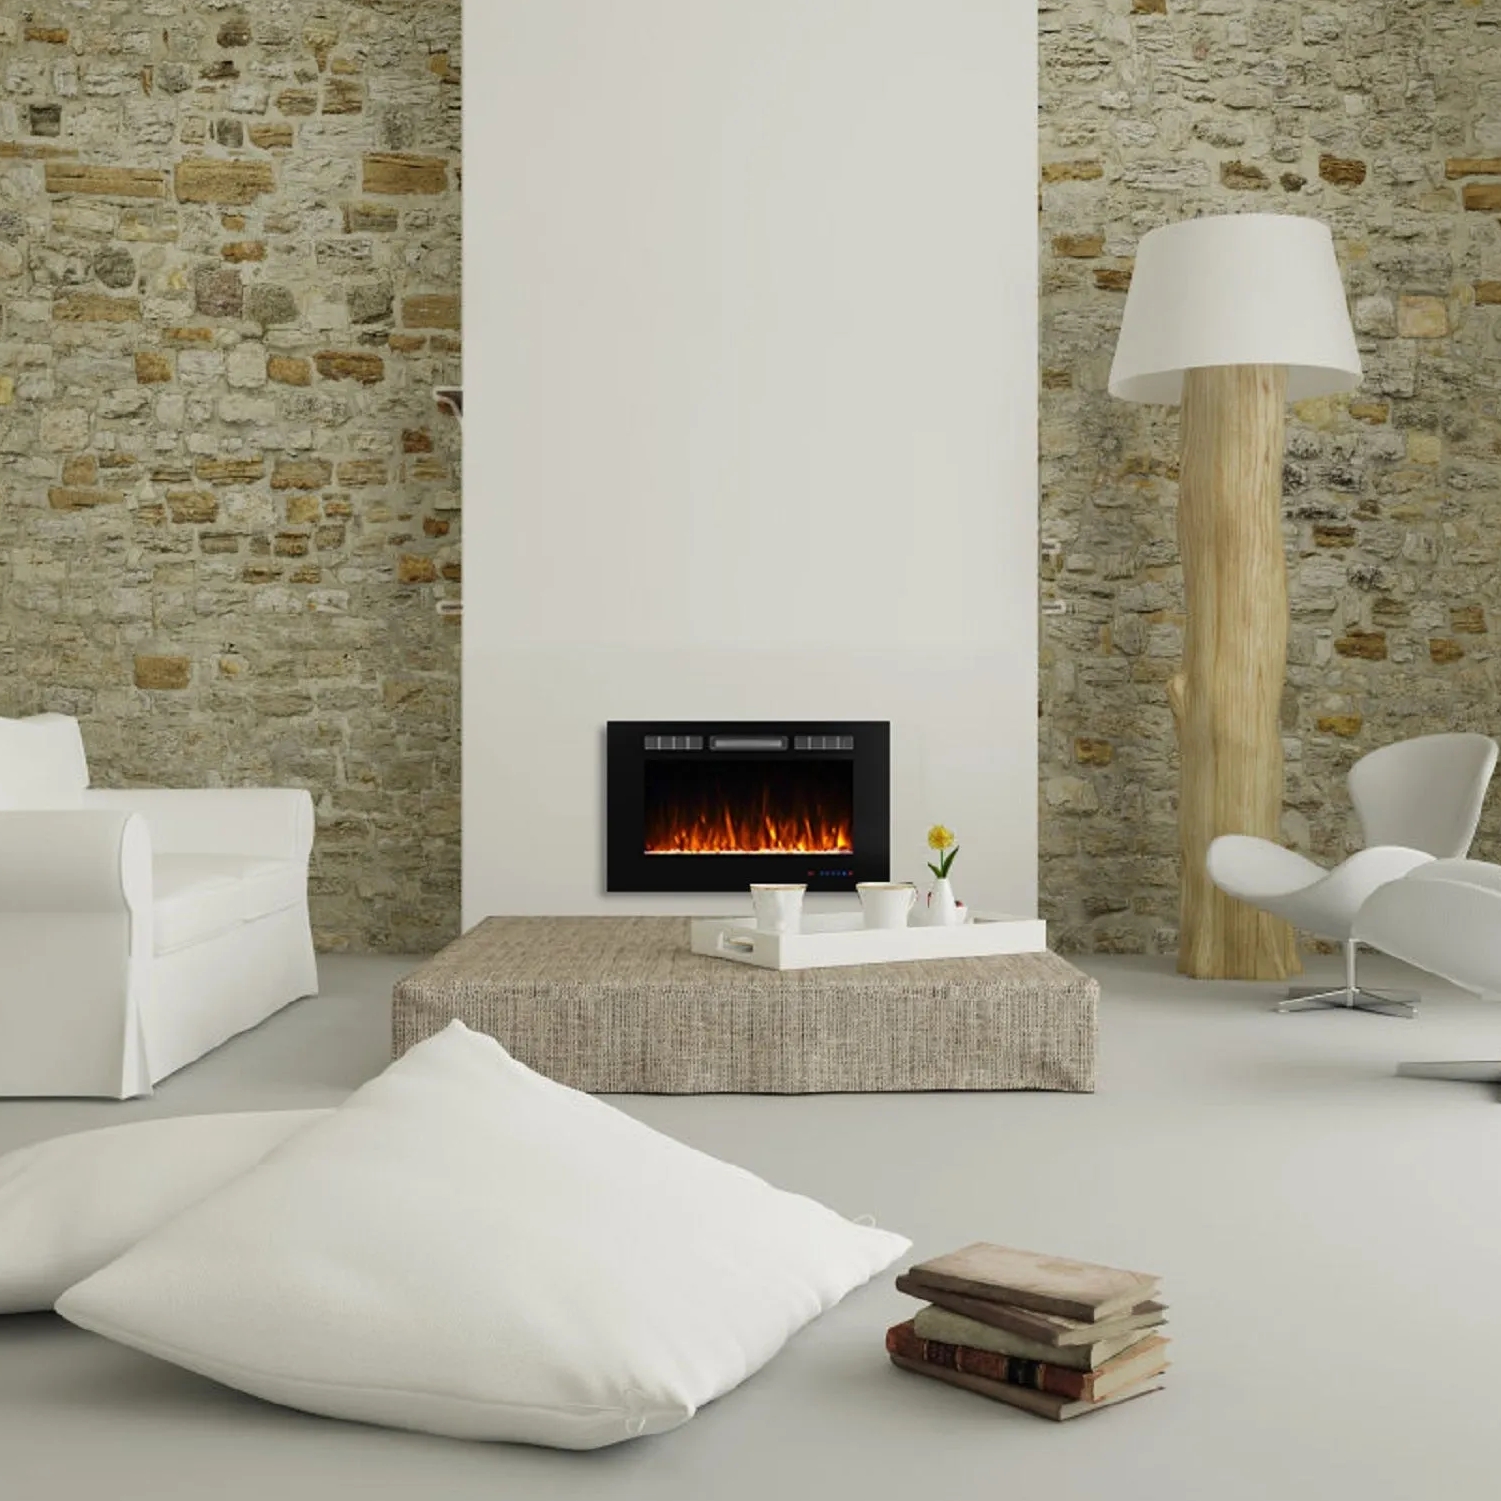 36 Electric Fireplace, Recessed Fireplace Insert in Black